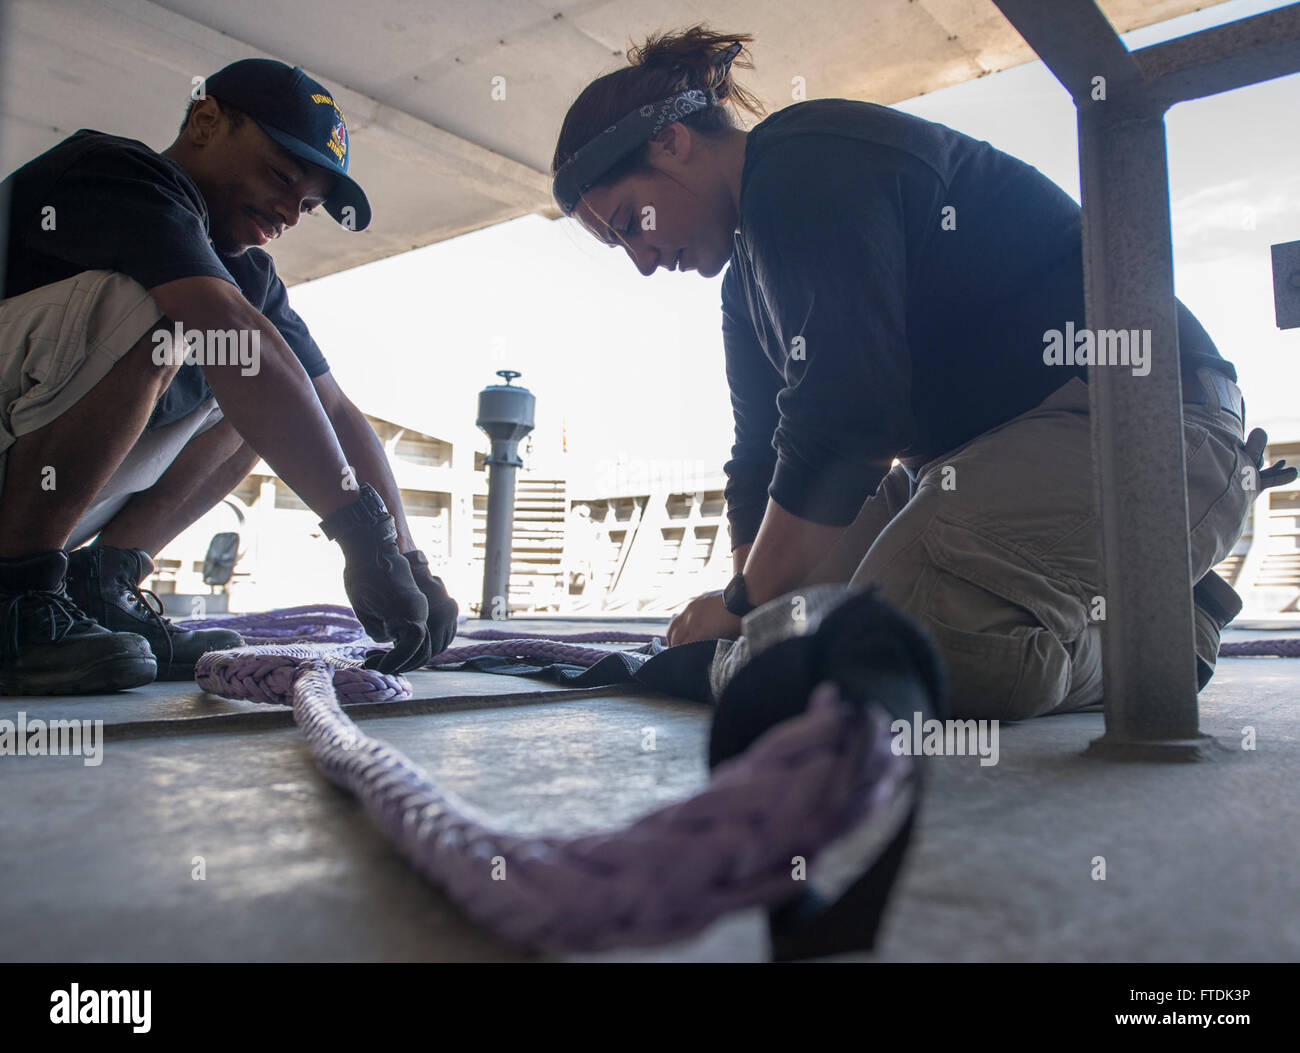 160104-N-WV703-070 ATLANTIC OCEAN (Jan. 4, 2016) Gabby Marionakis, a Deck  Midshipman, and David Leader, a civil service mariner, puts chaffing gear on the eye of a mooring line aboard USNS Spearhead (T-EPF 1) Jan. 4, 2015. The Military Sealift Command expeditionary fast transport vessel USNS Spearhead (T-EPF 1) is on a scheduled deployment to the U.S. 6th Fleet area of operations to support the international collaborative capacity-building program Africa Partnership Station. (U.S. Navy photo by Mass Communication Specialist 3rd Class Amy M. Ressler/Released) Stock Photo